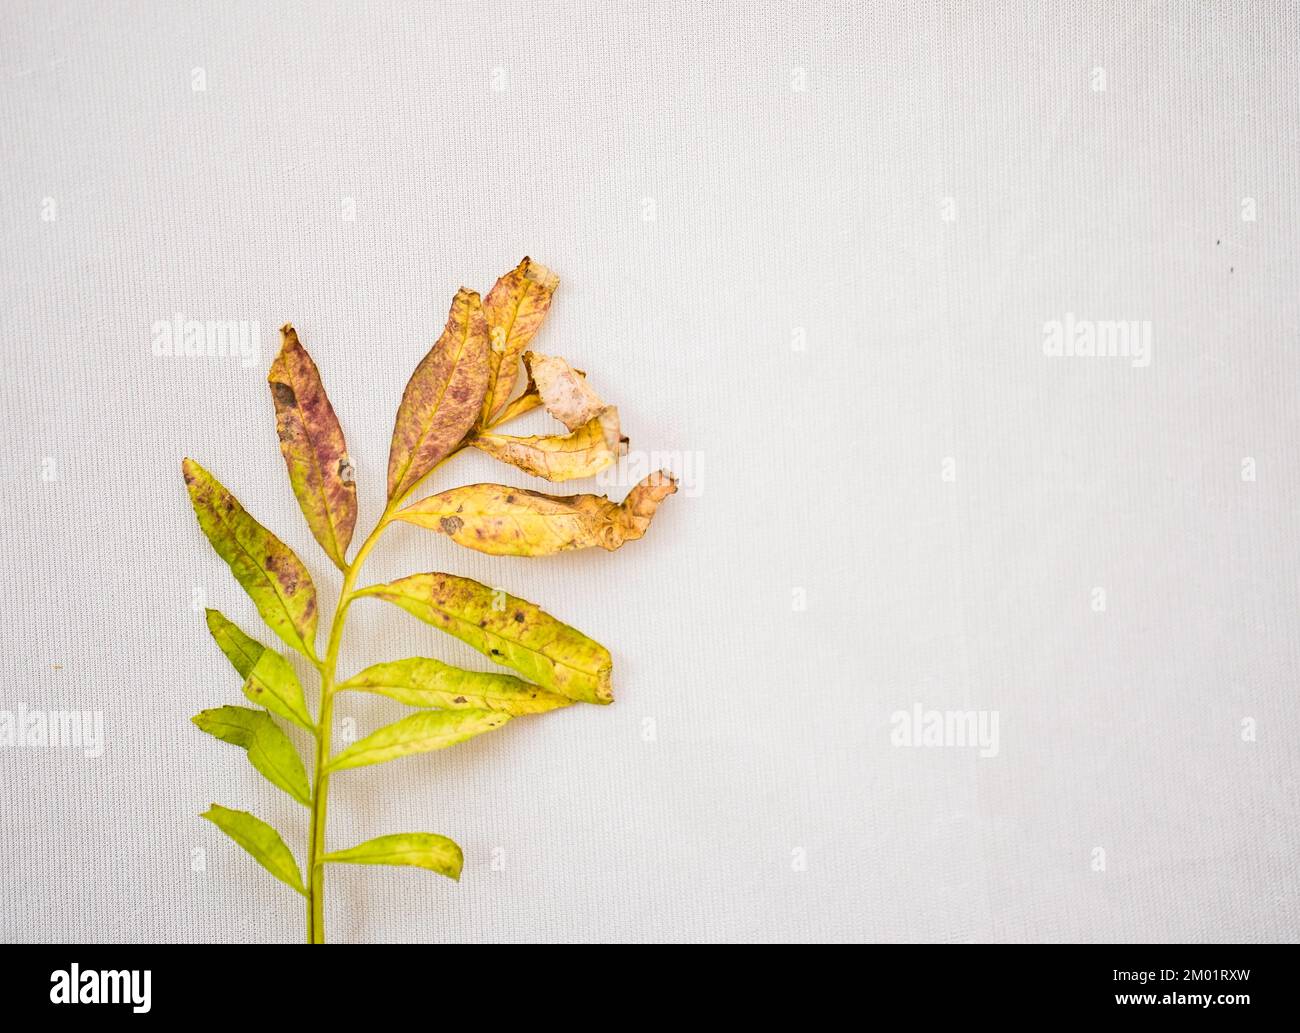 Beautiful Yellow and green gradient leaf isolated on white background,A dry leaf, A dry greenish leaf kept left size, Place text, Flat, copy, lay Stock Photo